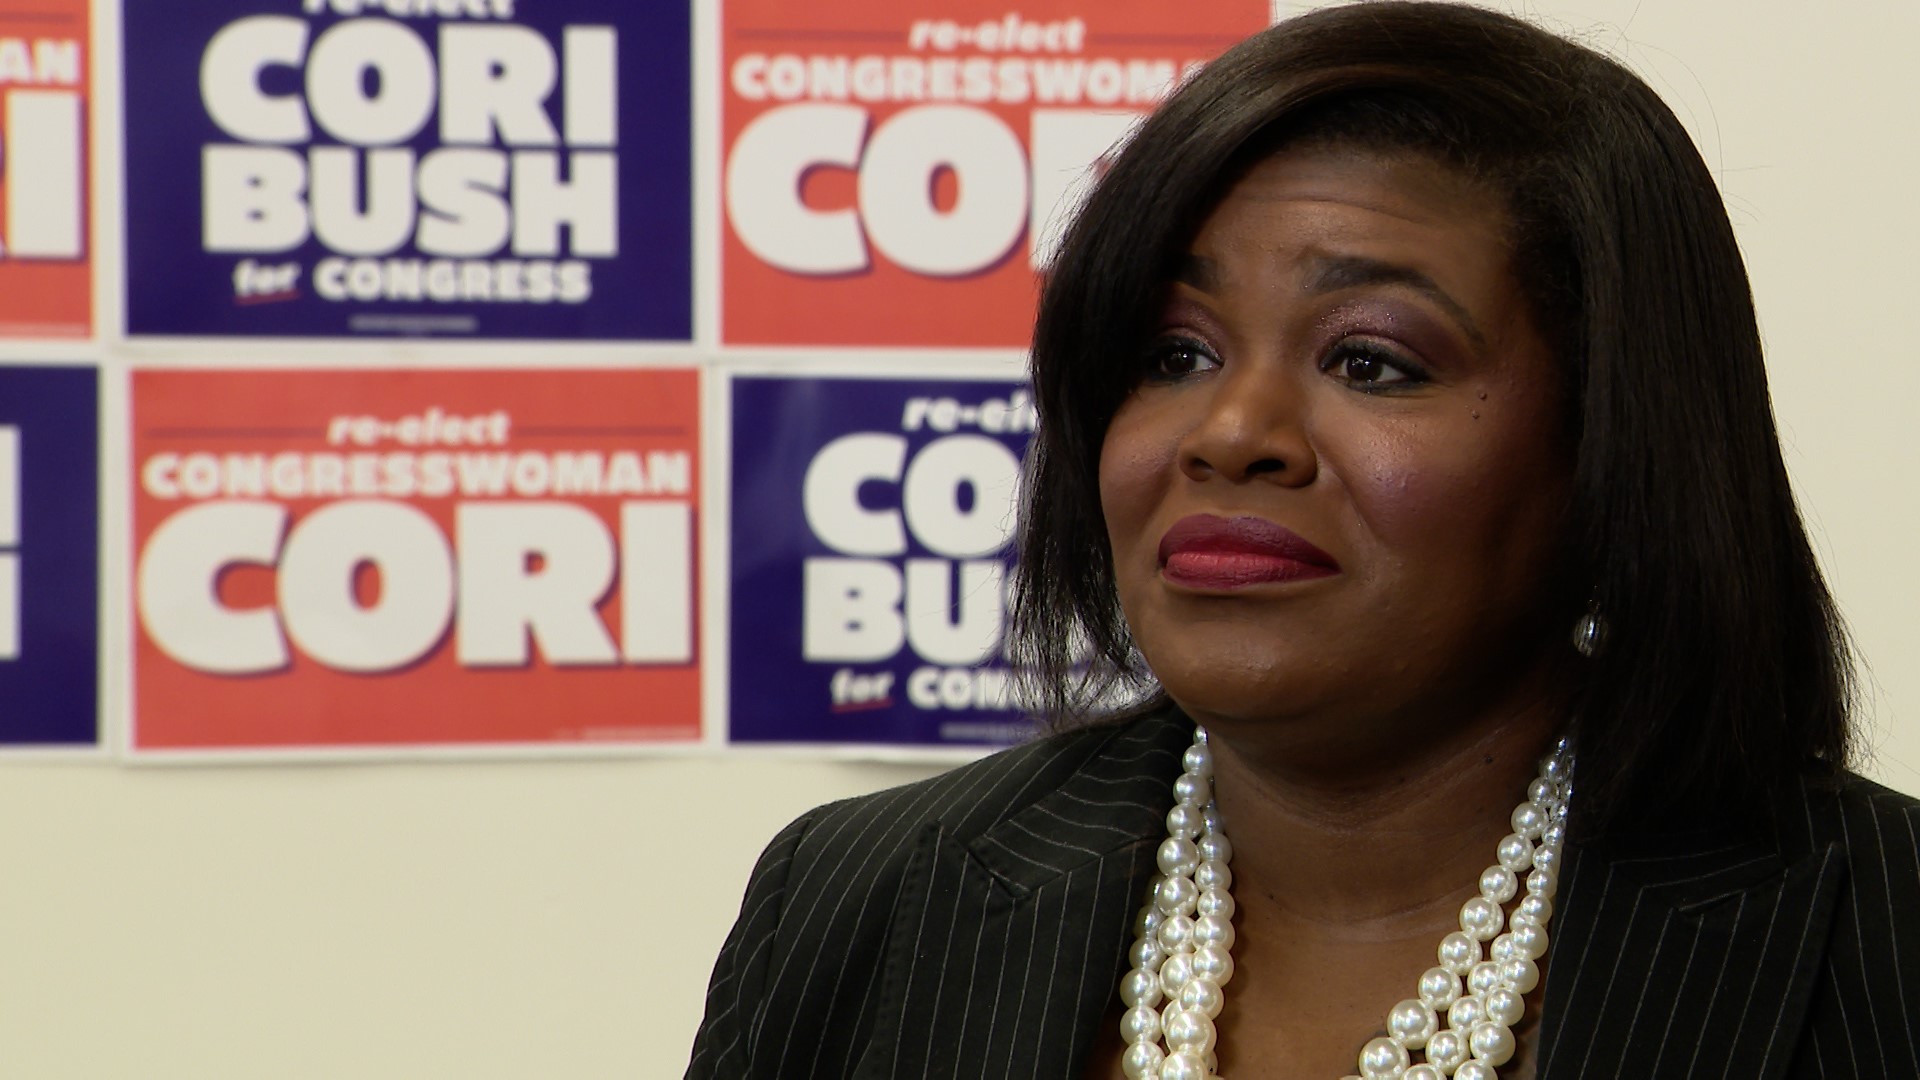 Political editor Mark Maxwell on Monday sat down with Rep. Cori Bush. During the interview, he asked her if she wants to see President Biden run for a second term.